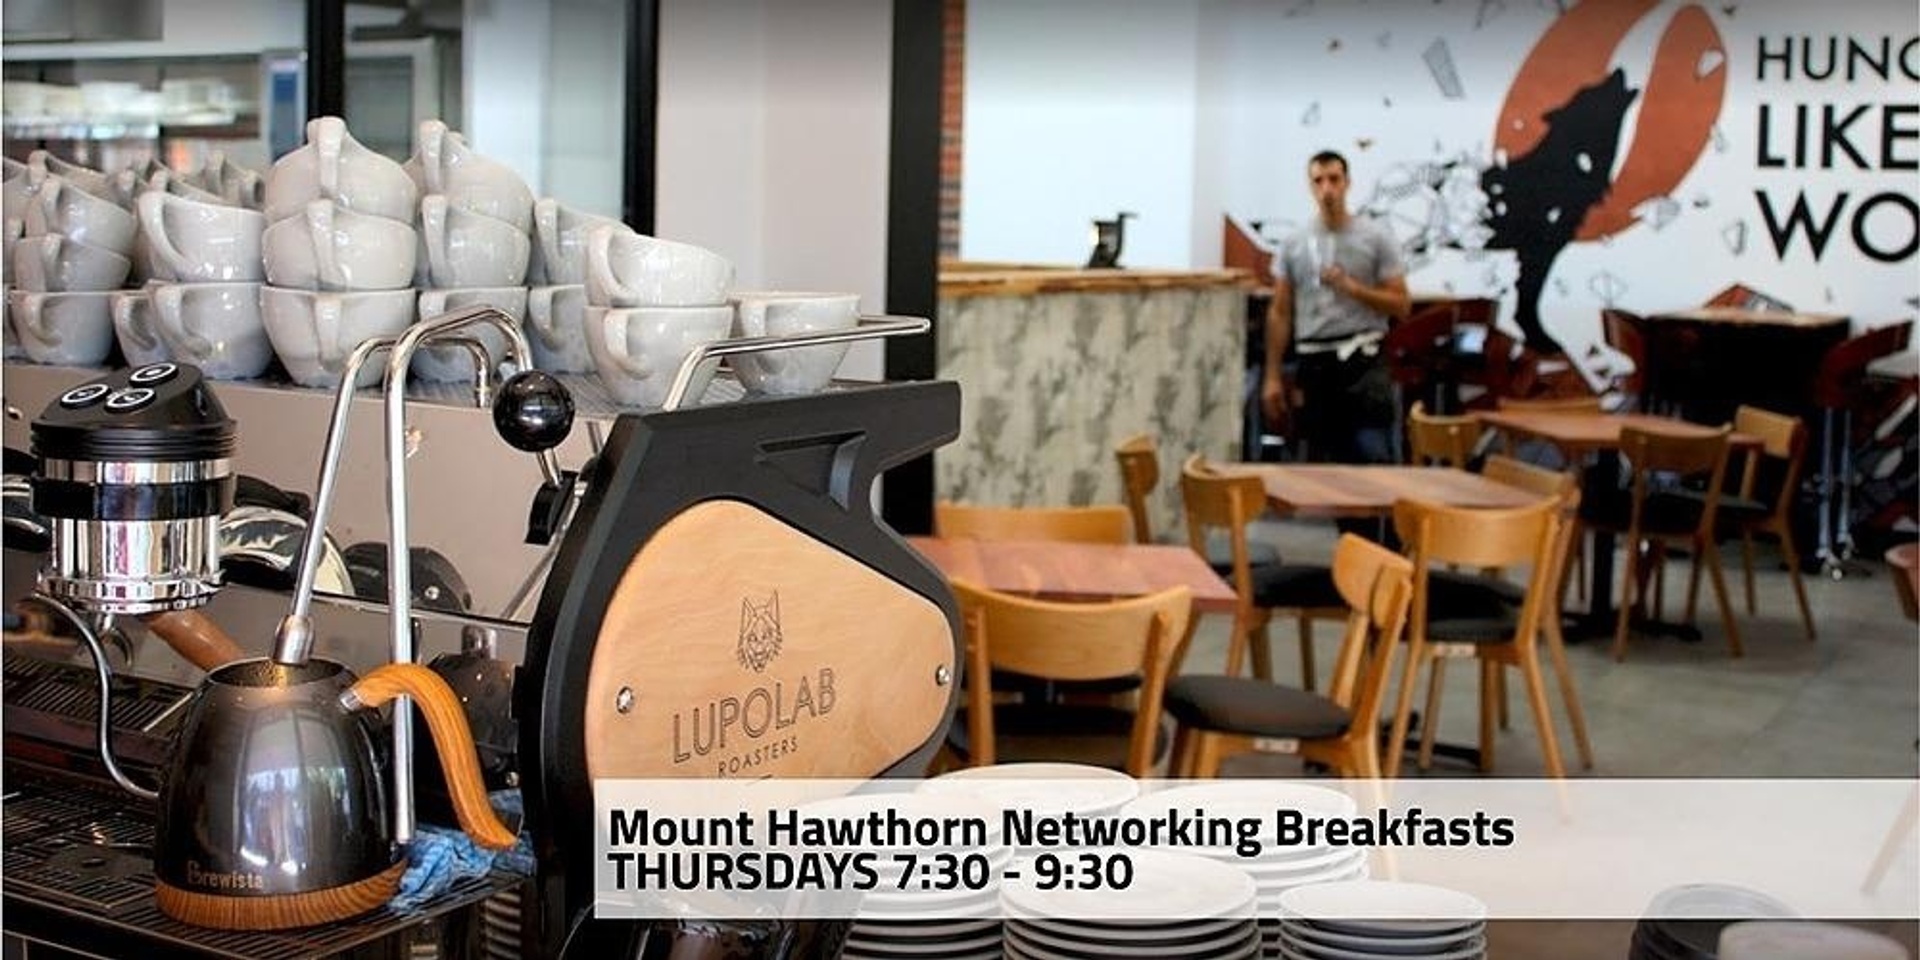 Facilit8 Networking Breakfasts 2022 - (Thu) Mt Hawthorn Group